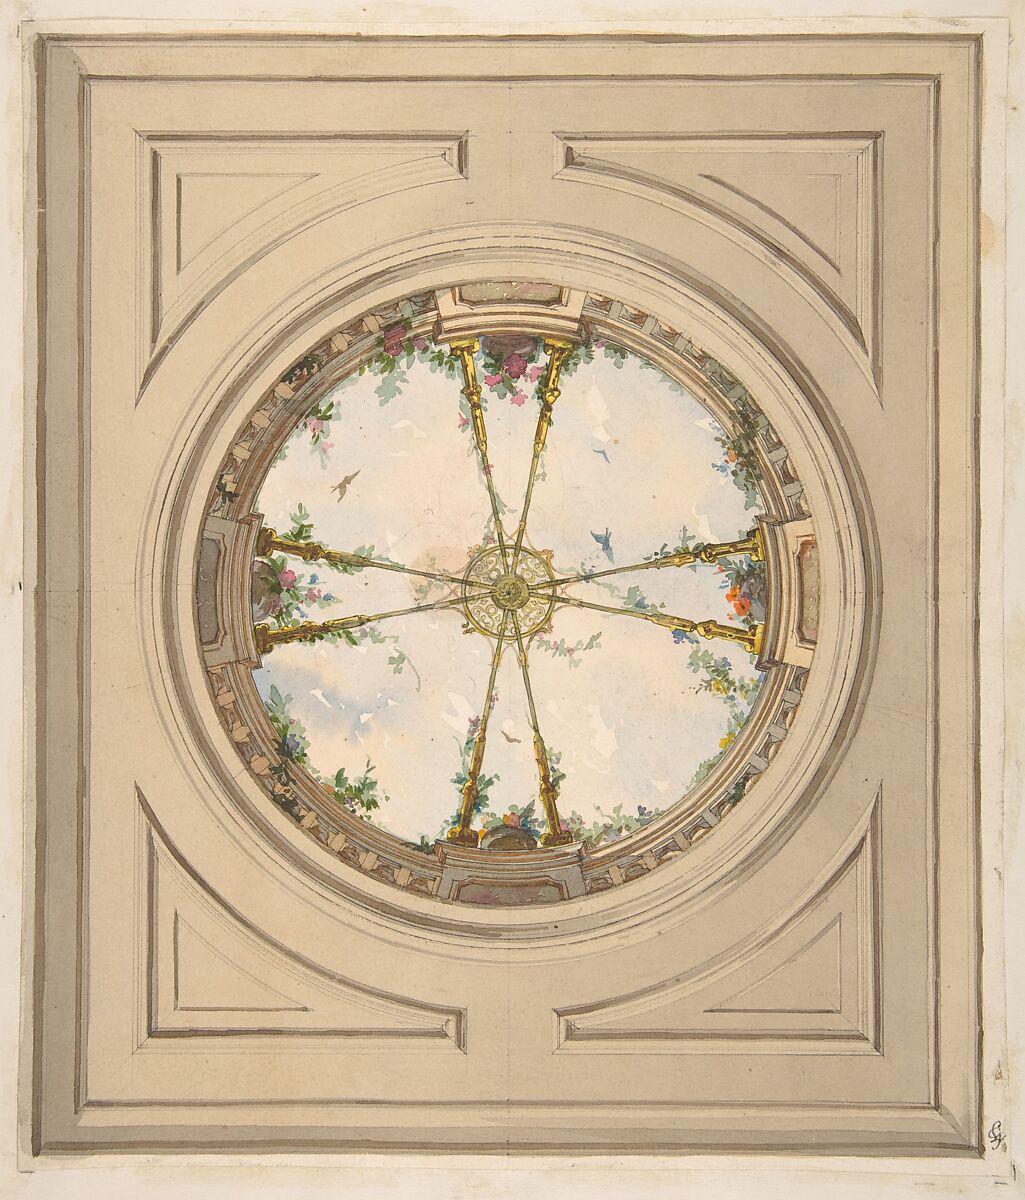 Design for a ceiling painted with clouds and trellis work, Jules-Edmond-Charles Lachaise (French, died 1897), graphite, pen and ink, and watercolor on wove paper; mounted on wove paper 